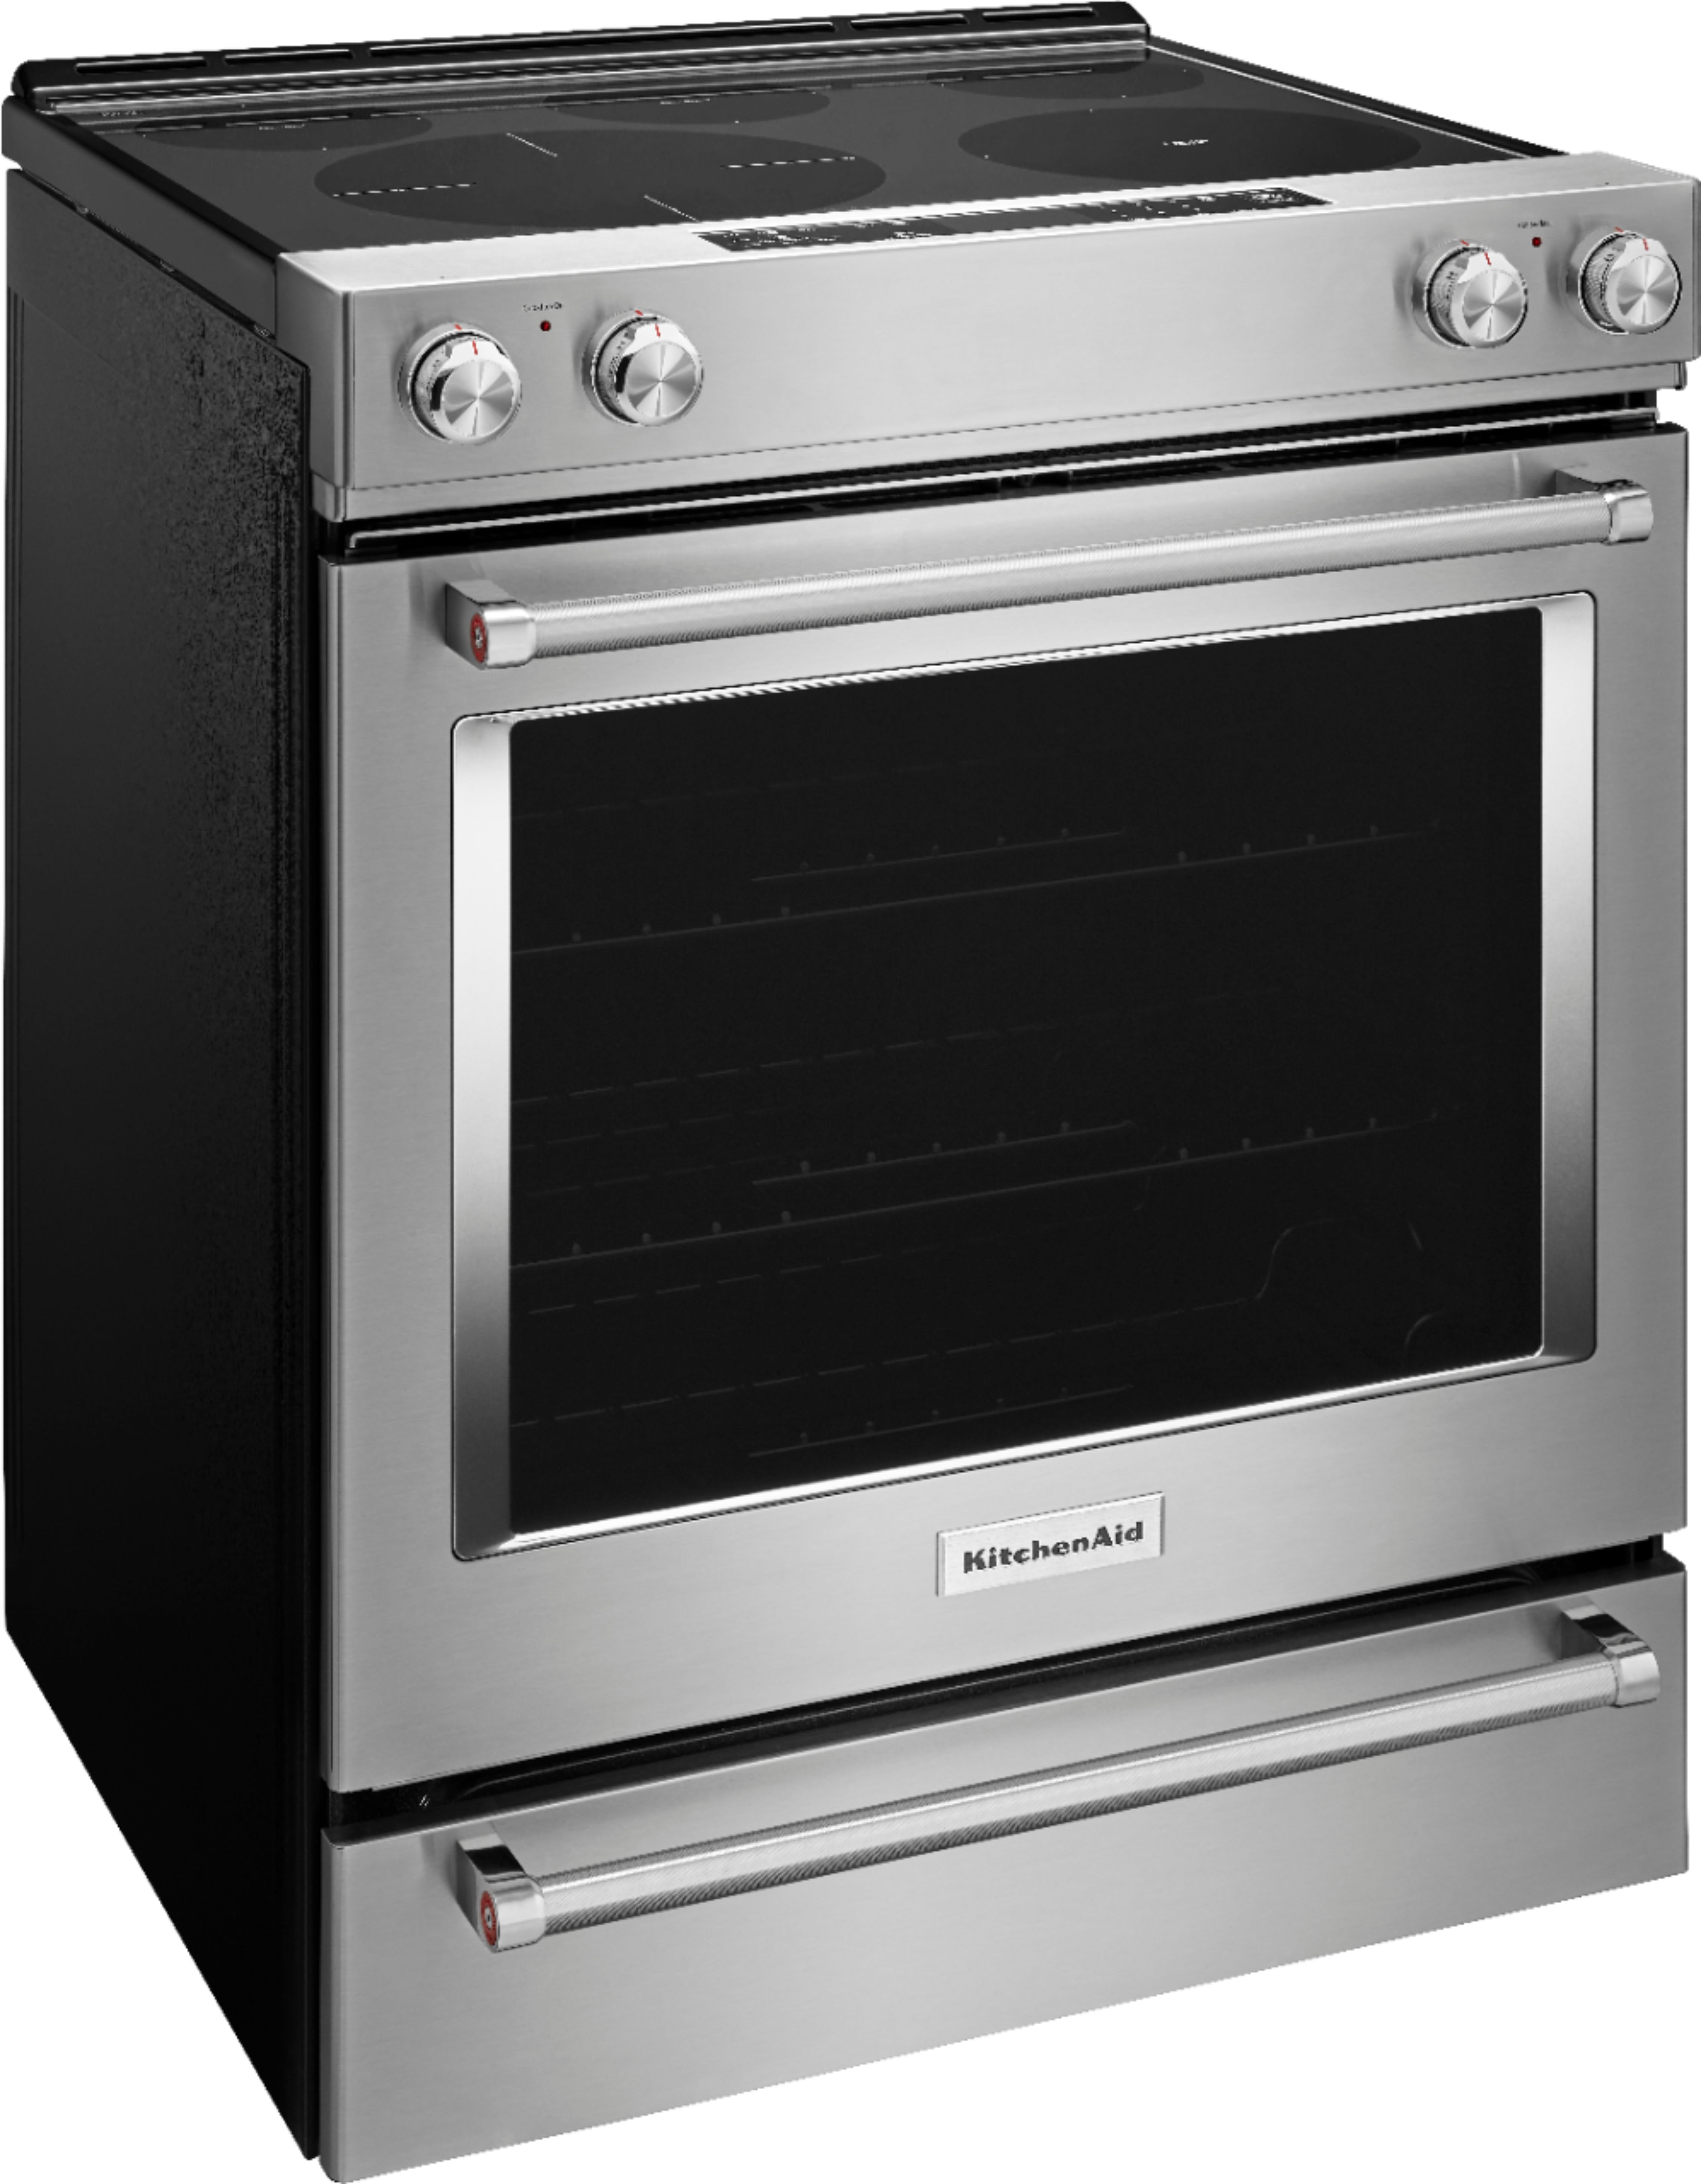 Angle View: Samsung - 6.0 cu. ft. Smart Freestanding Gas Range with Flex Duo & Air Fry - Black Stainless Steel